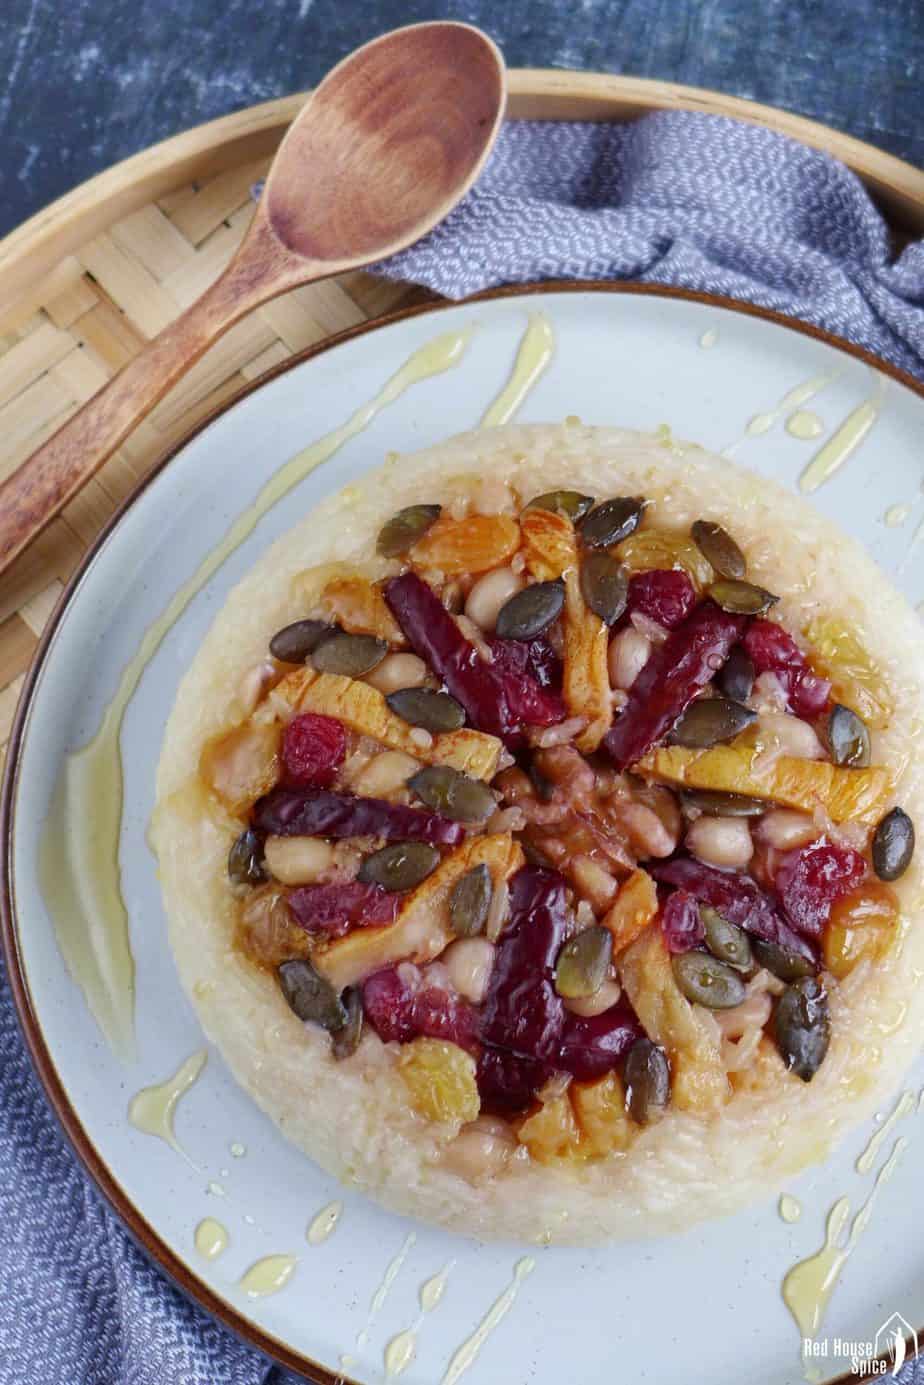 Eight treasure rice pudding topped with dried fruits and nuts